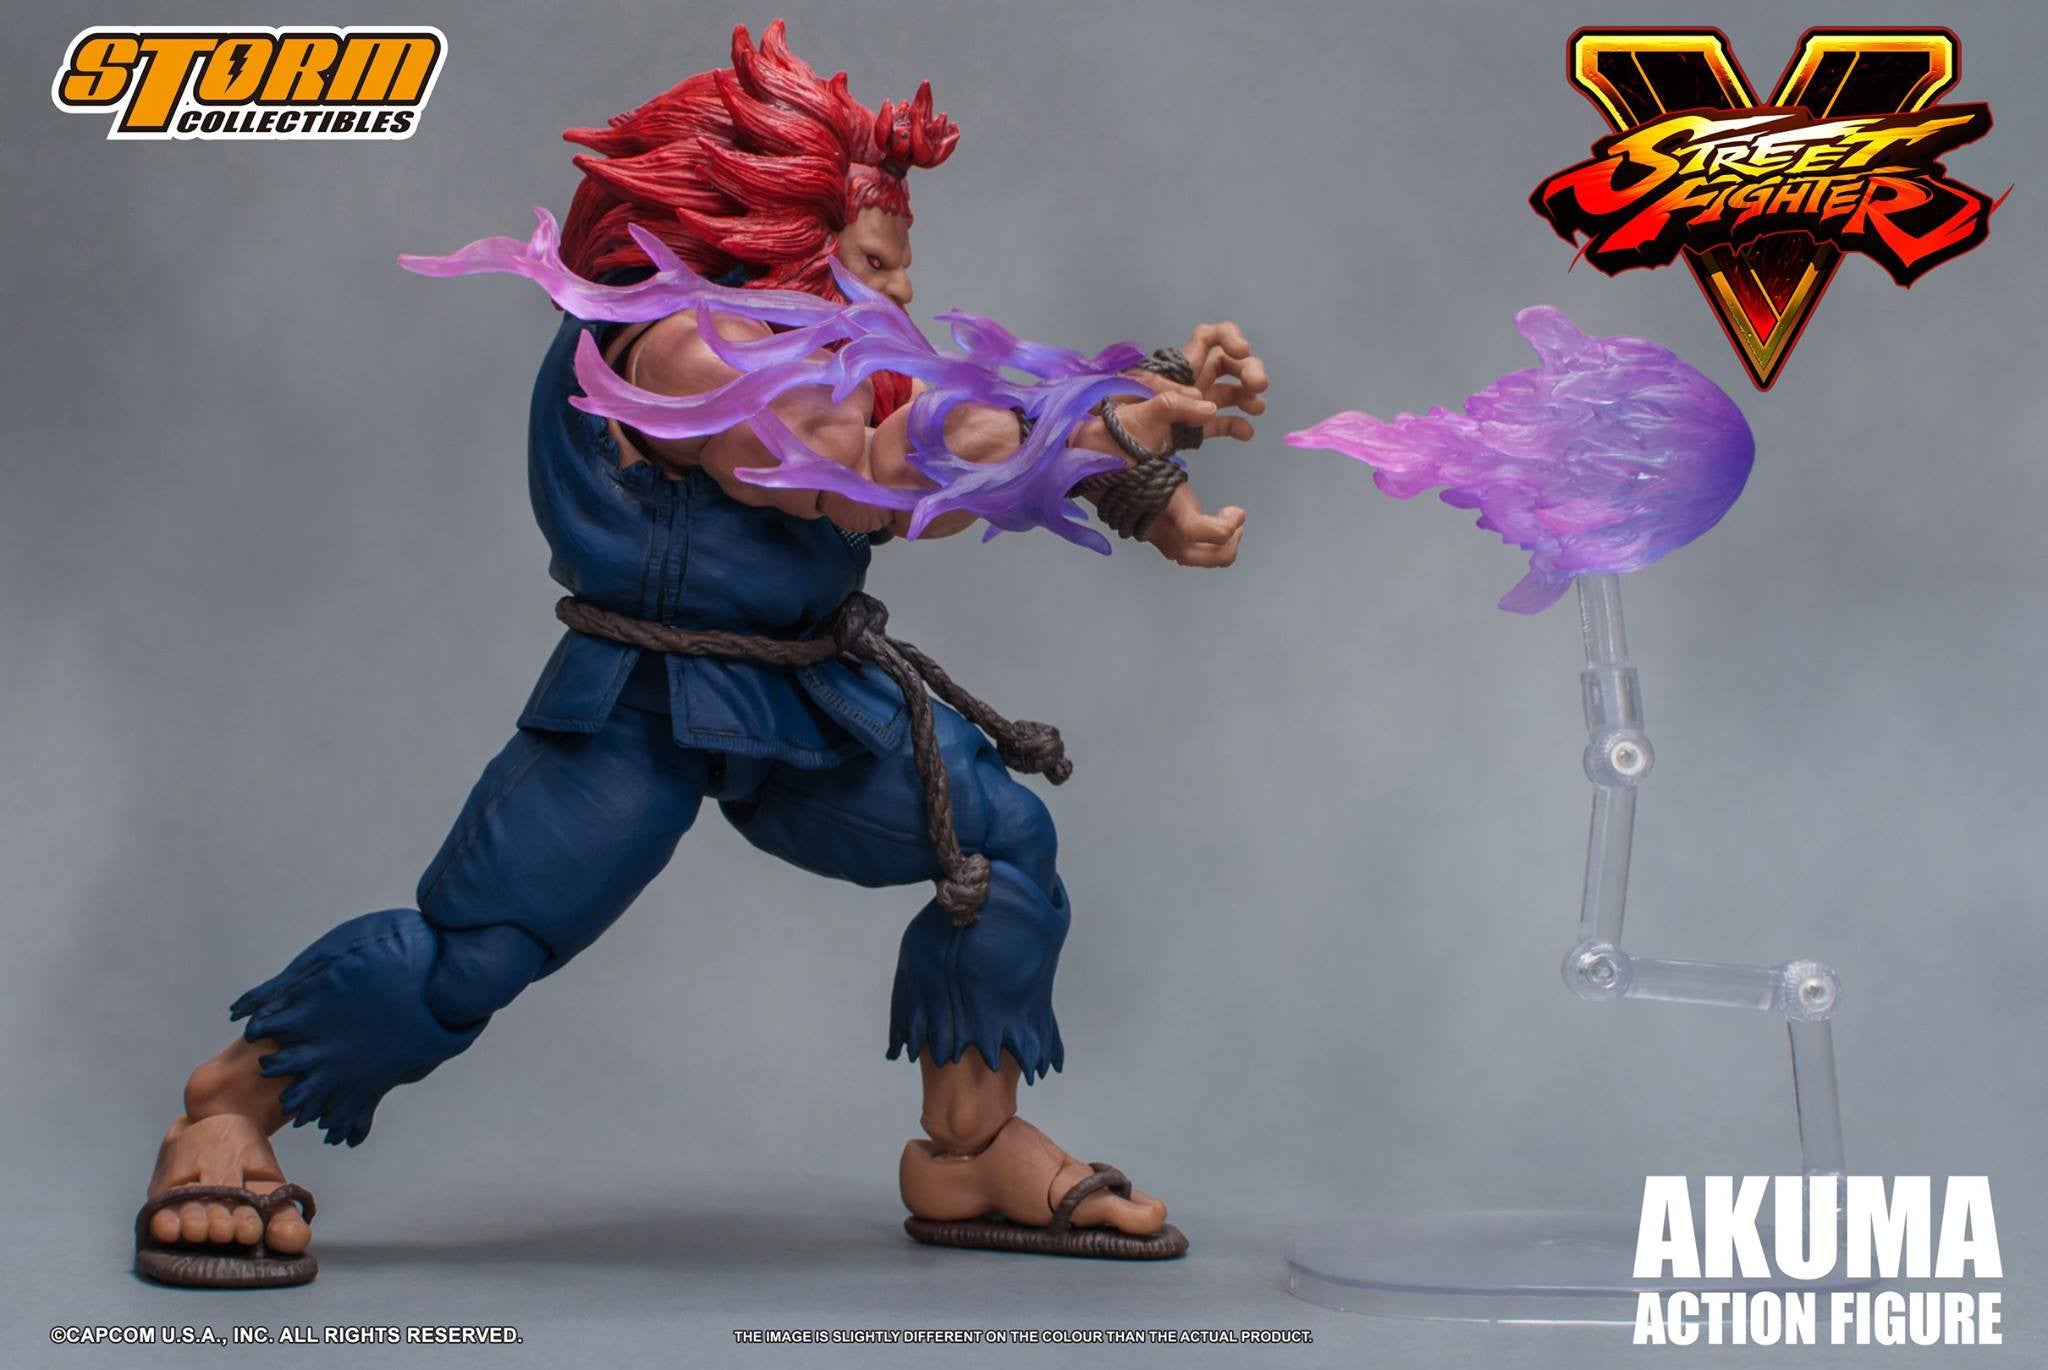 Storm Collectibles - 1:12 Scale Action Figure - Street Fighter V - Akuma